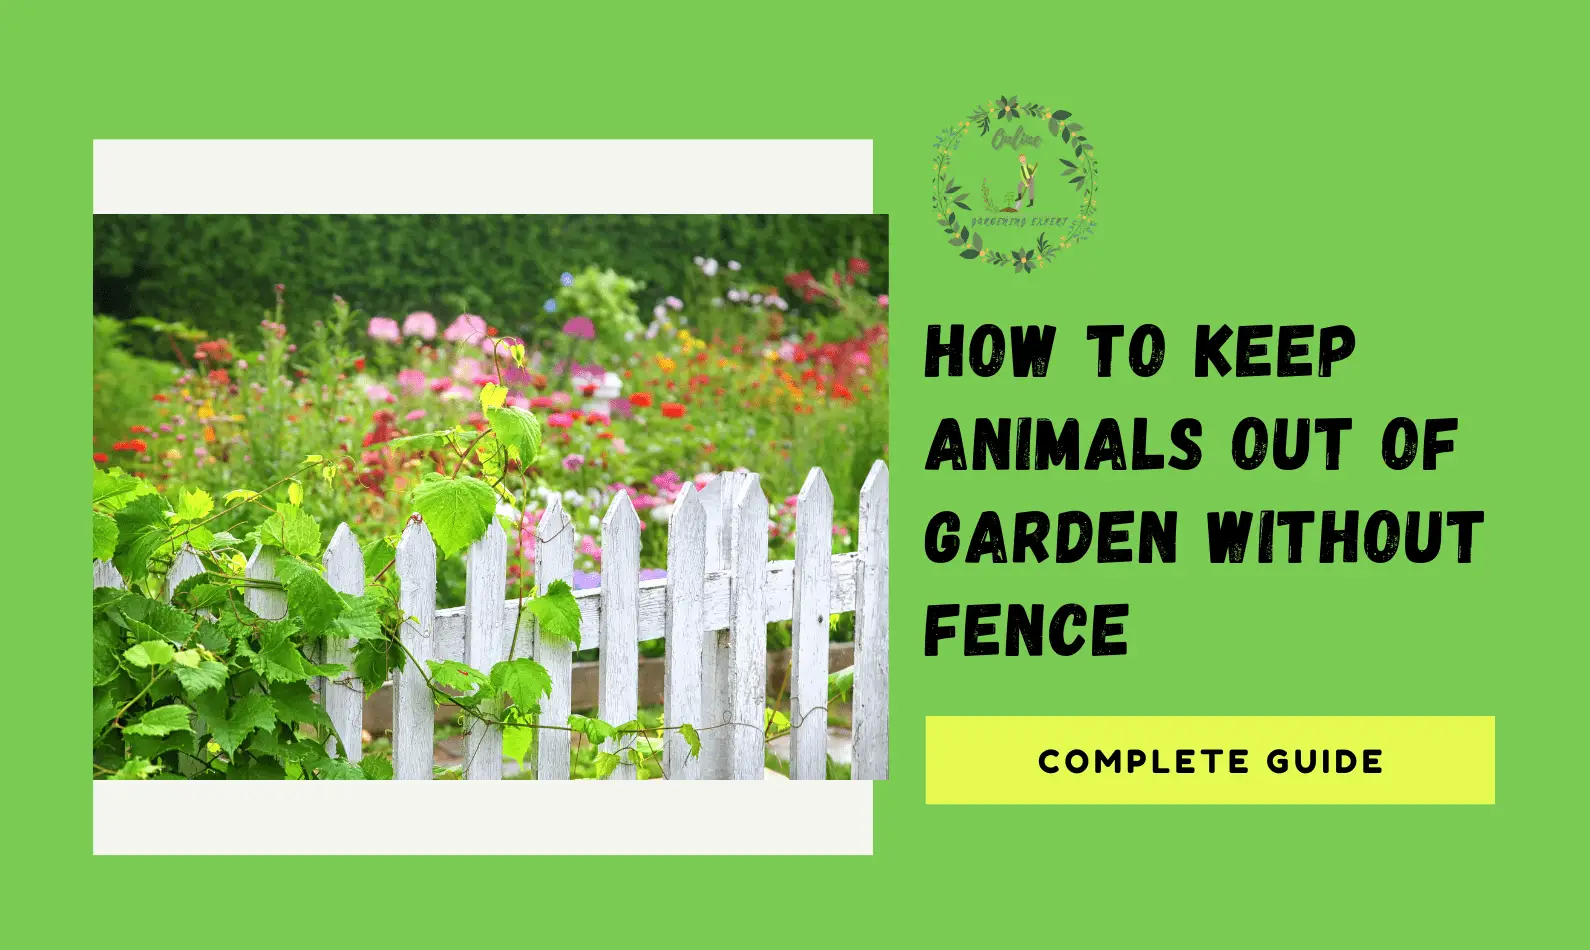 How to Keep Animals Out of Garden Without Fence?